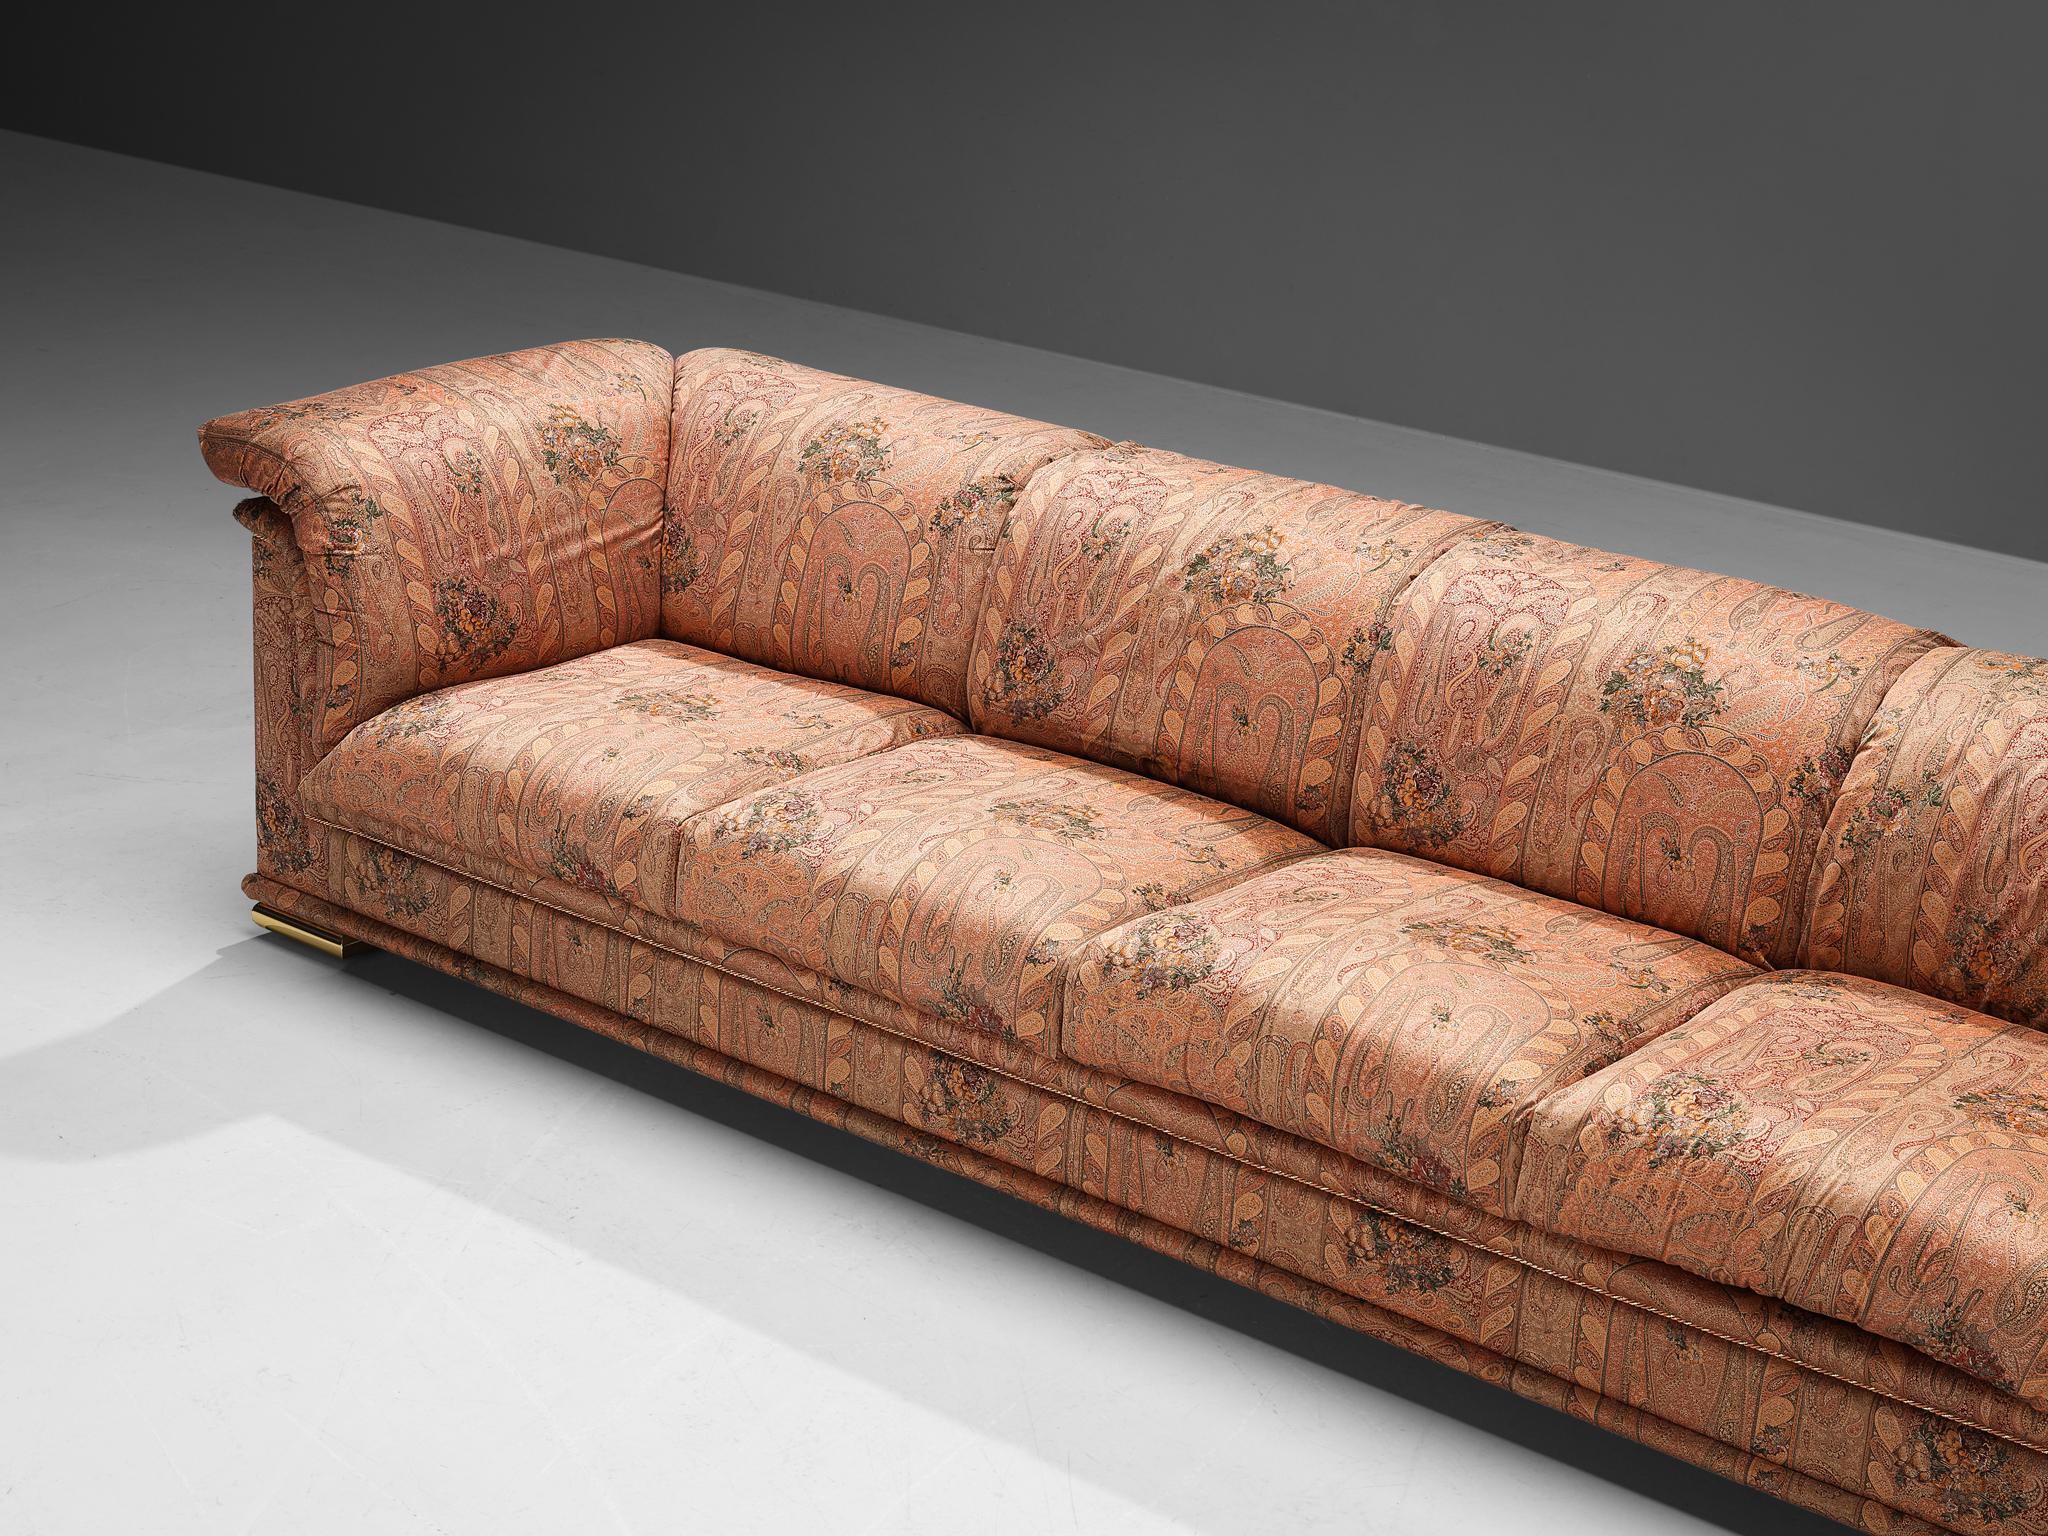 Metal Large Italian Sofa in Vibrant Red Paisley Upholstery For Sale